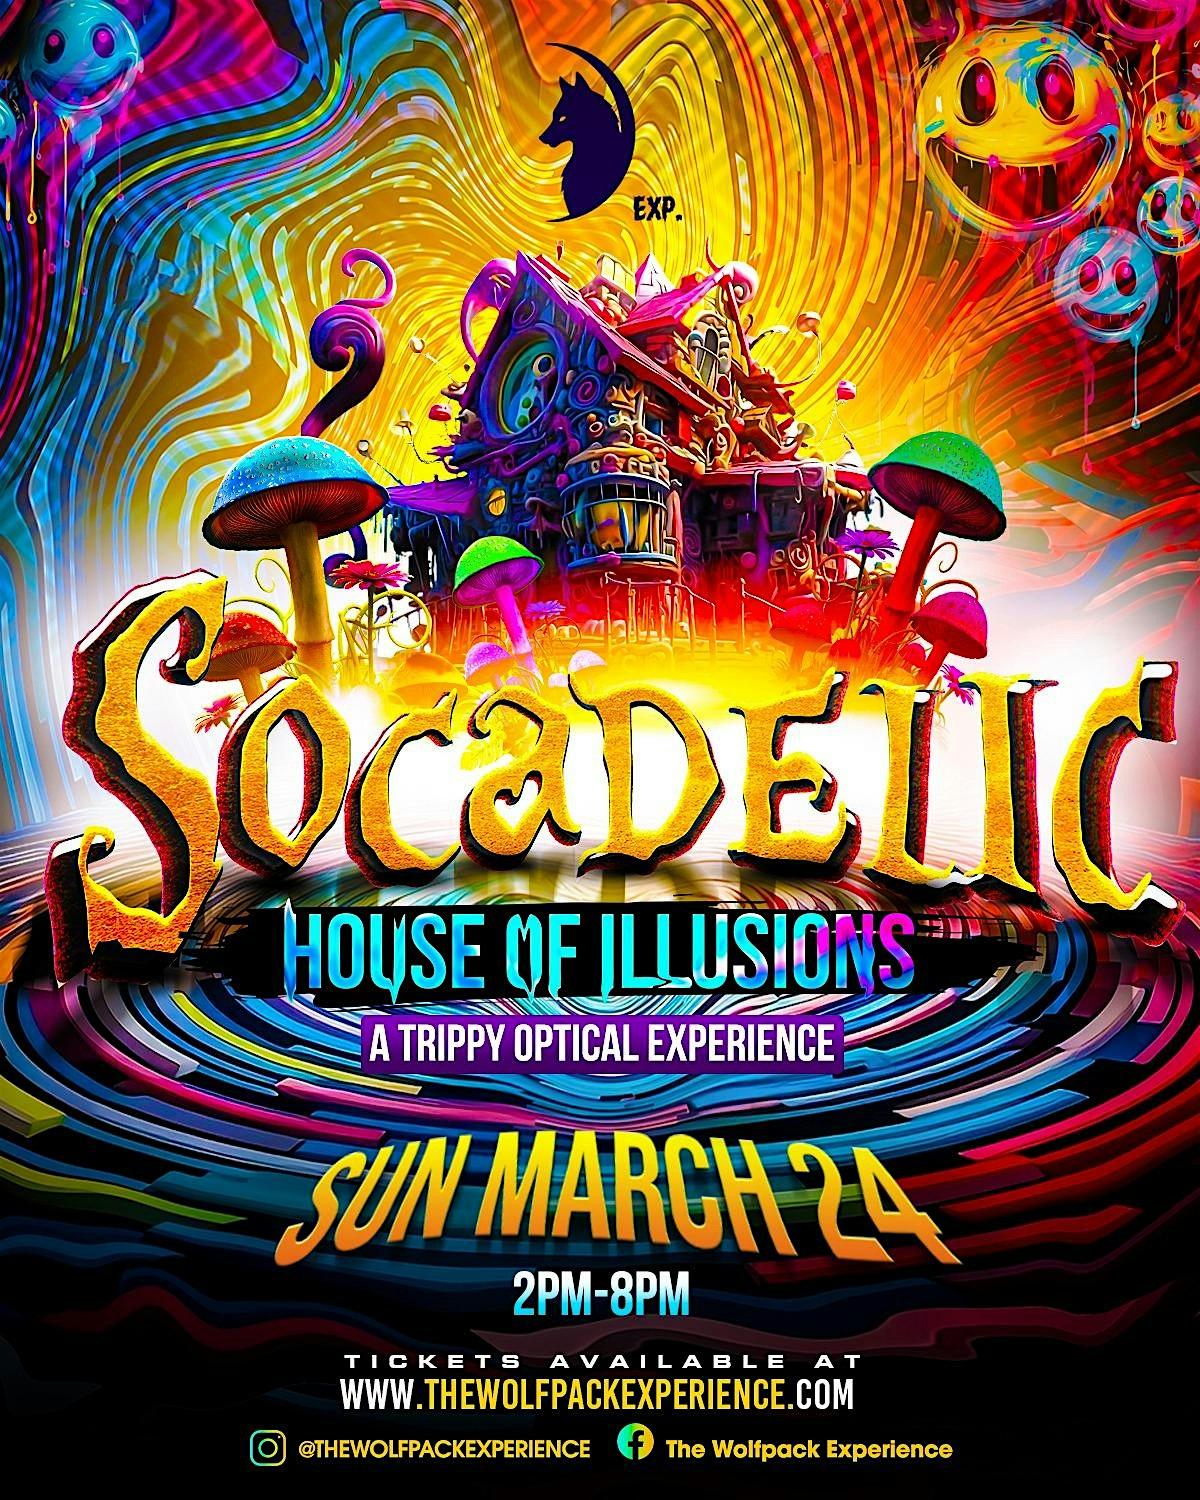 Socadelic: House of Illusions flyer or graphic.